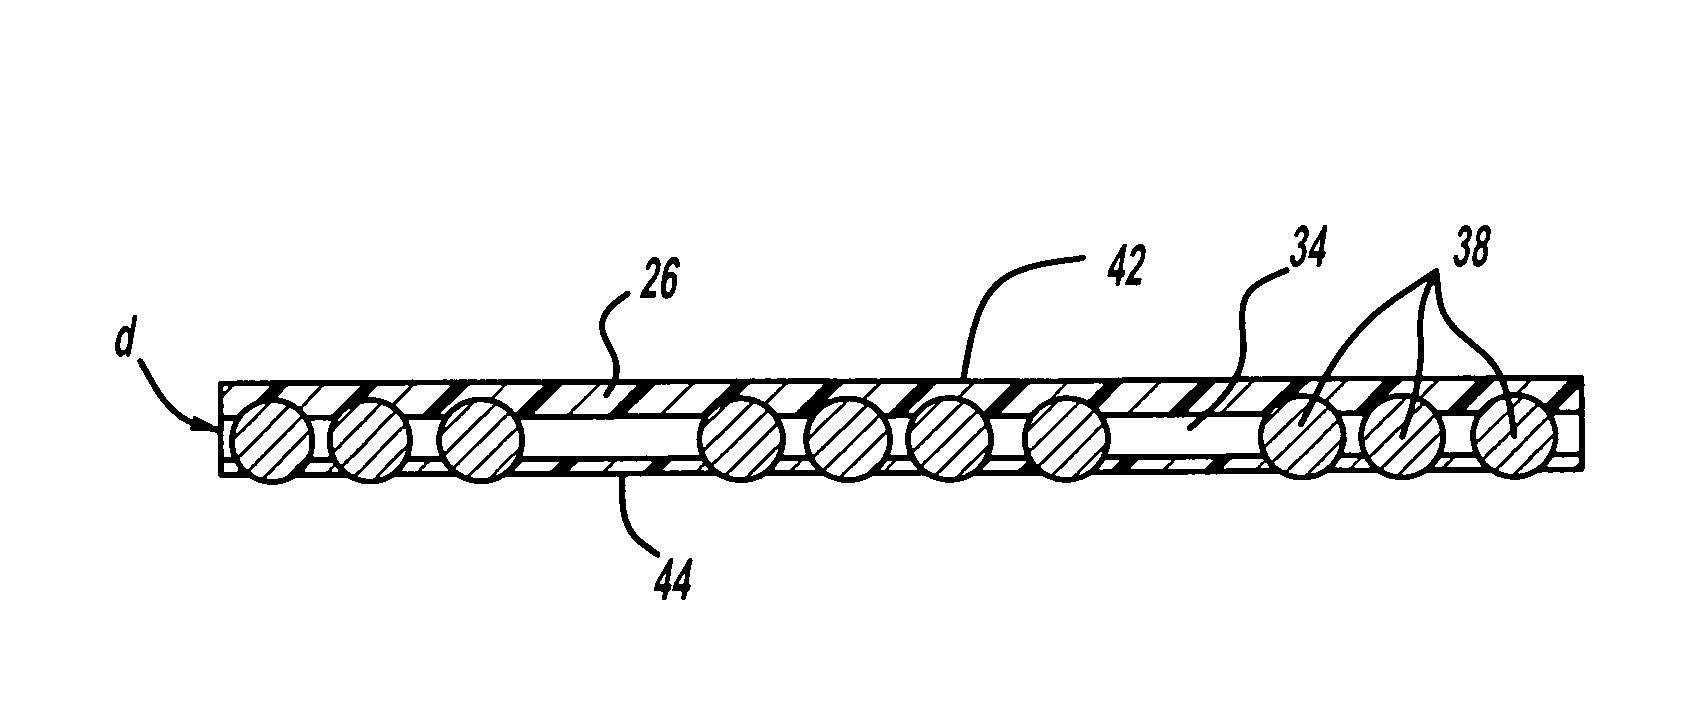 Reinforced extrusion and method for making same